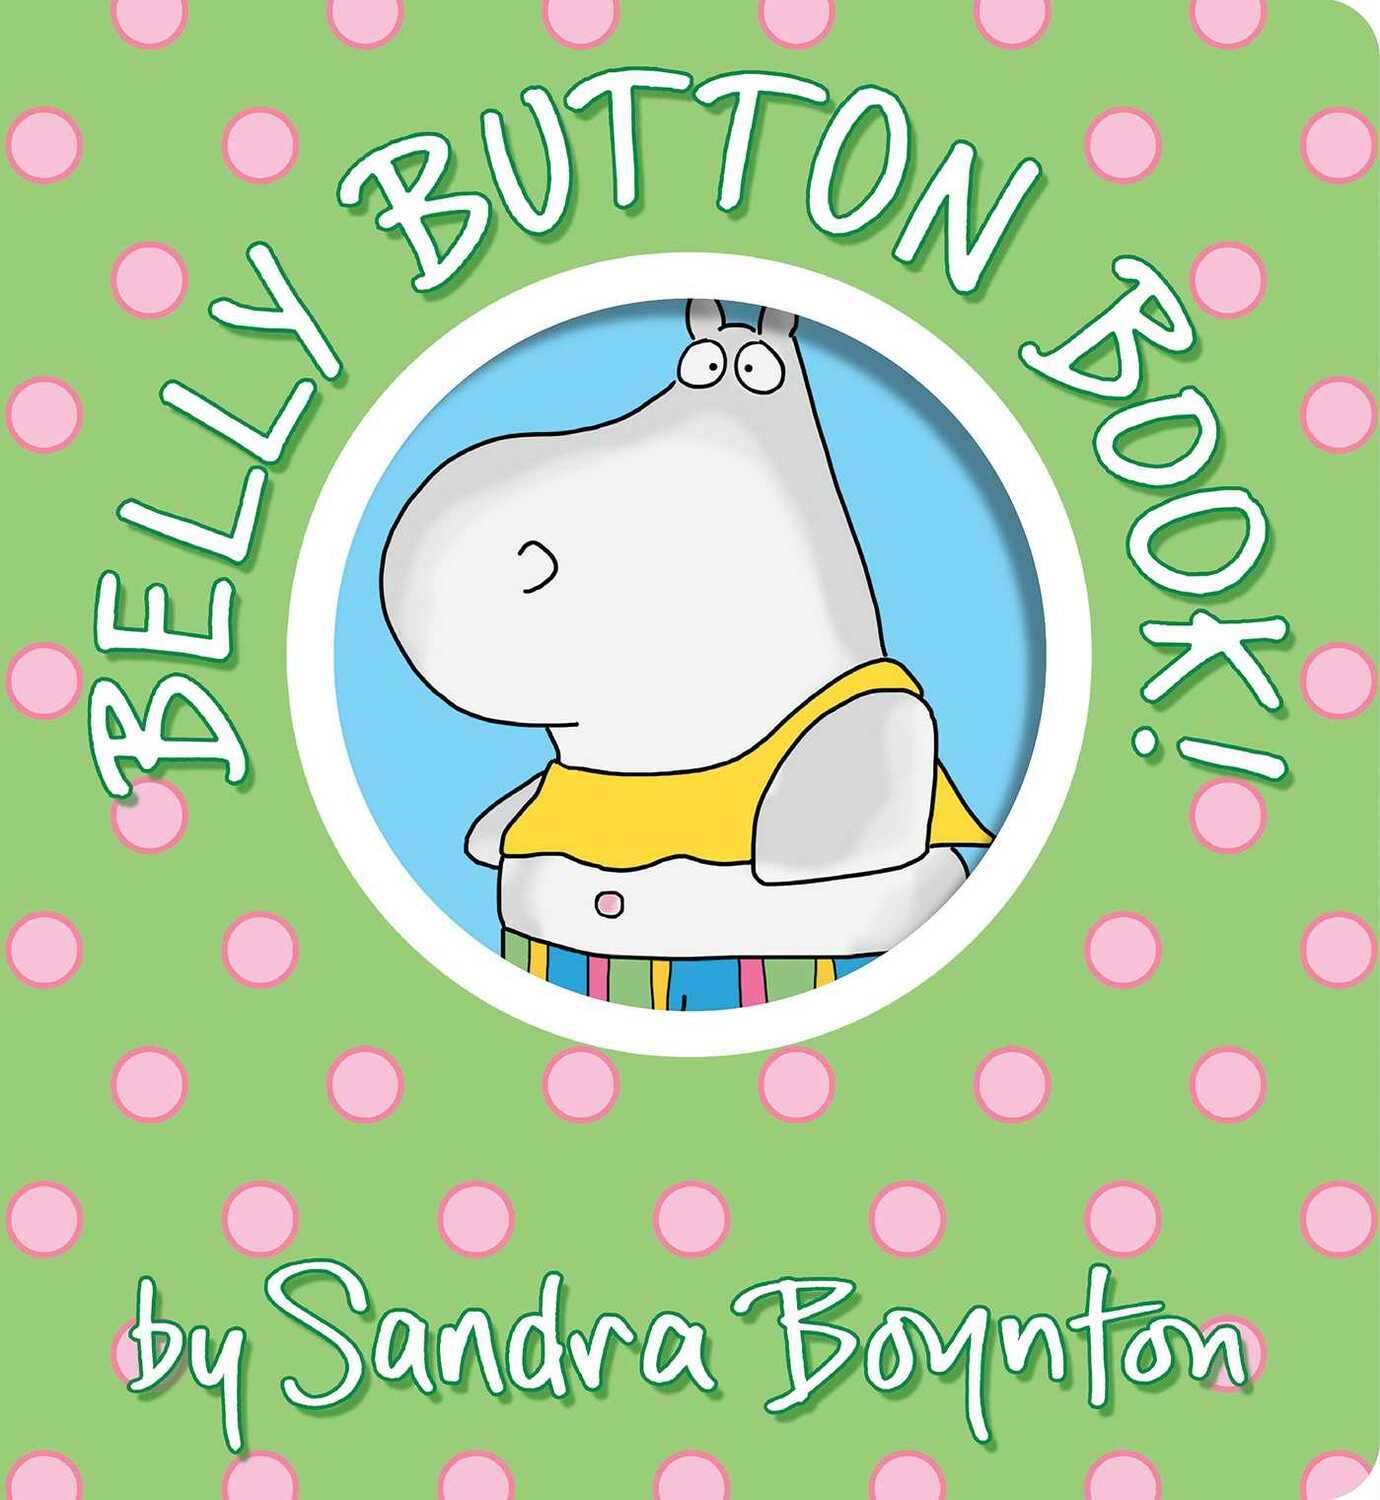 Belly Button Book!: Oversized Lap Board Book